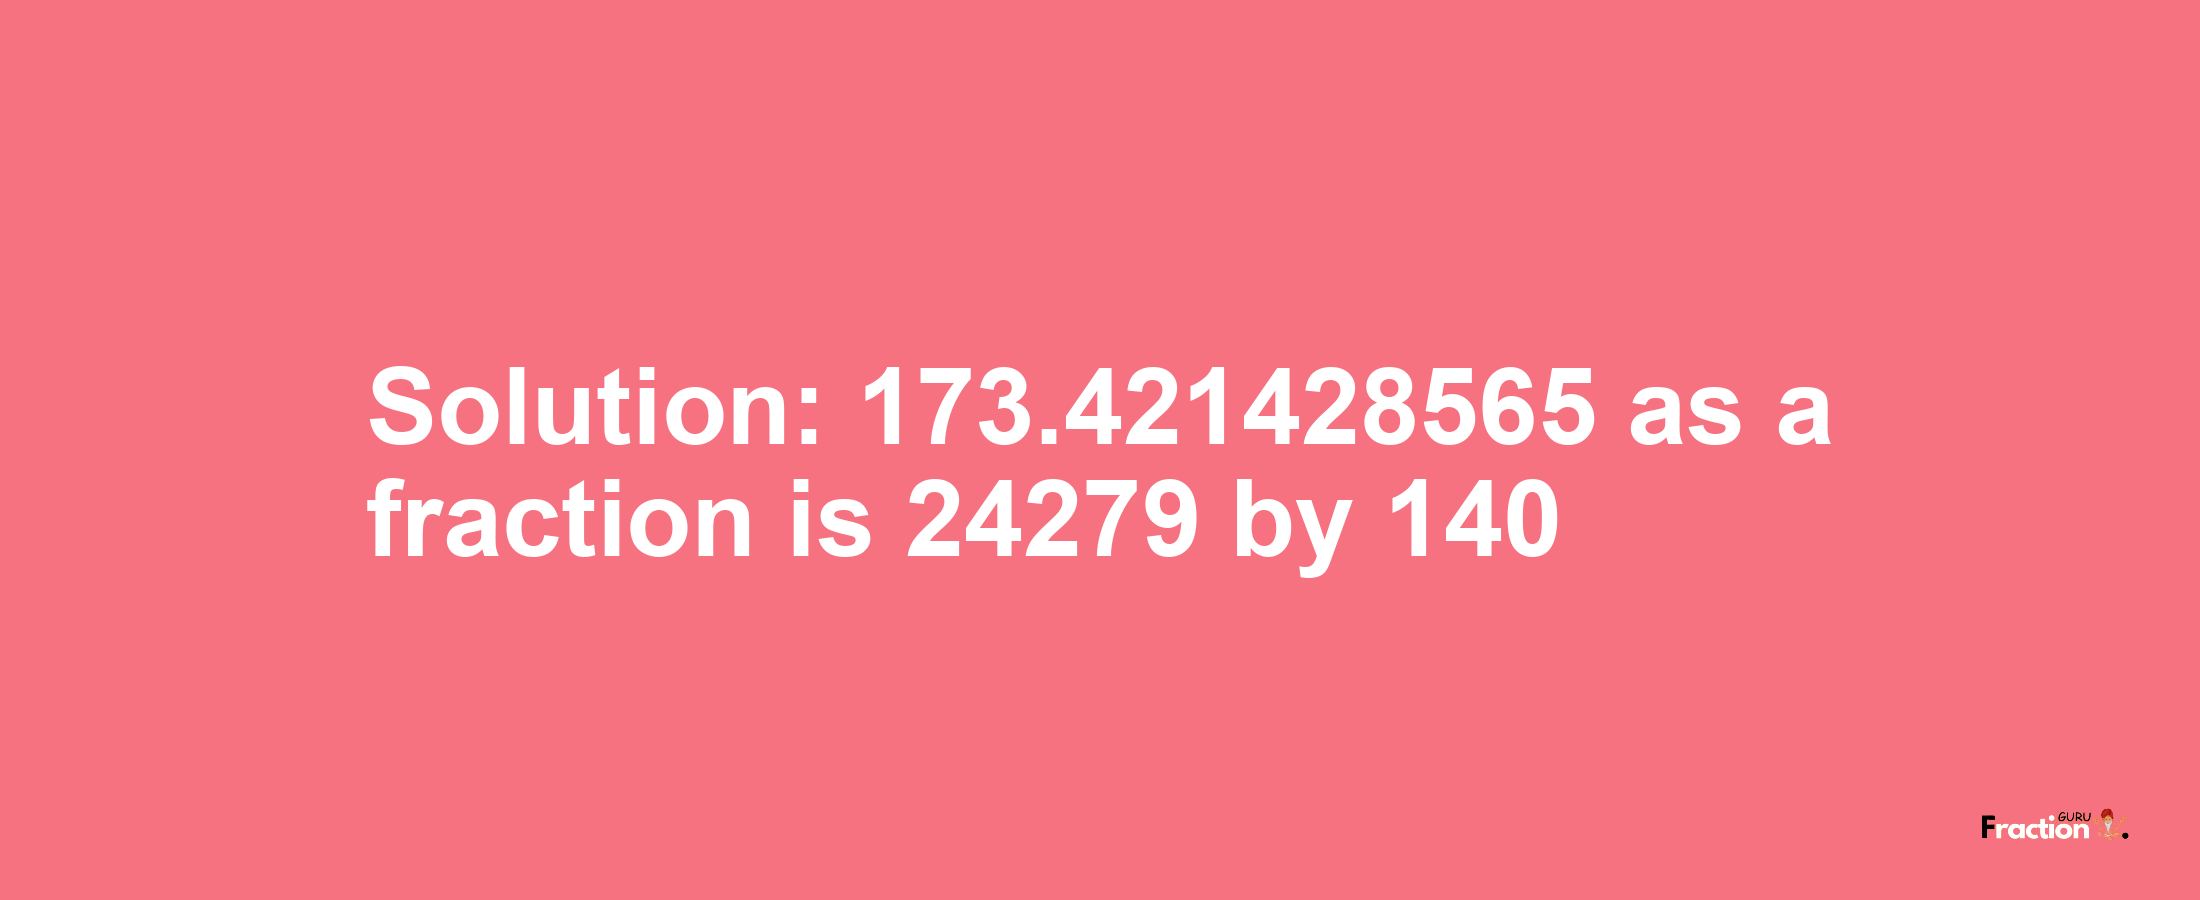 Solution:173.421428565 as a fraction is 24279/140